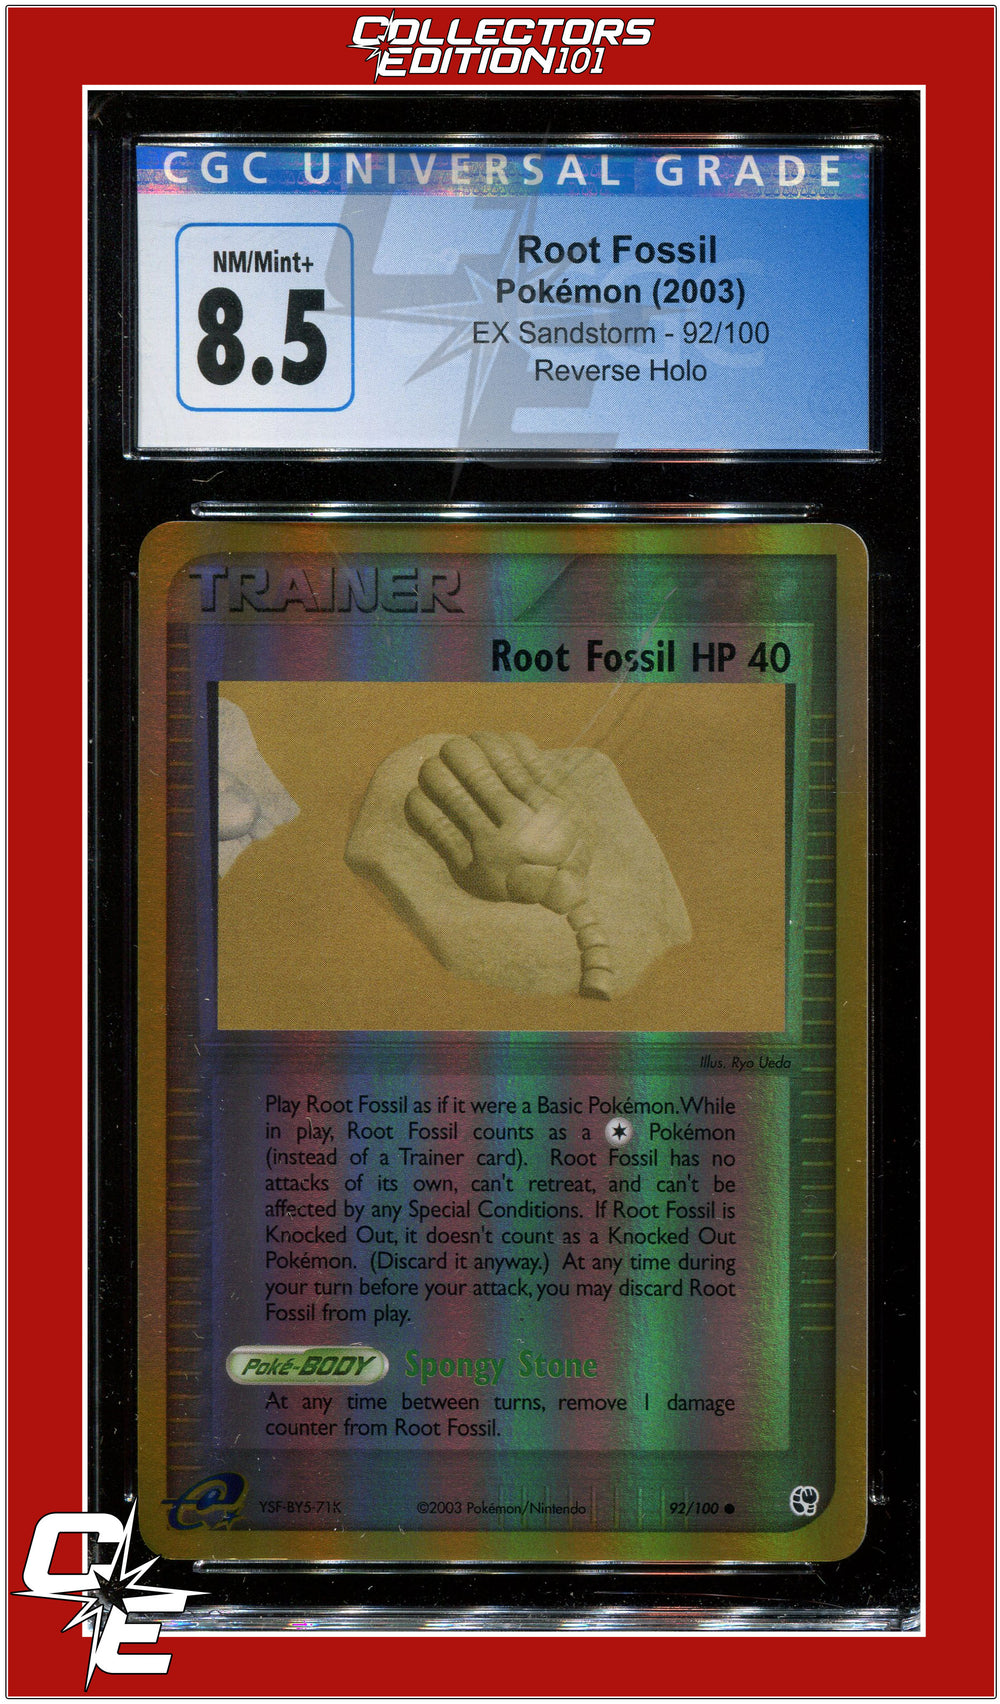 EX Sandstorm Root Fossil Reverse Holo 92/100 CGC 8.5